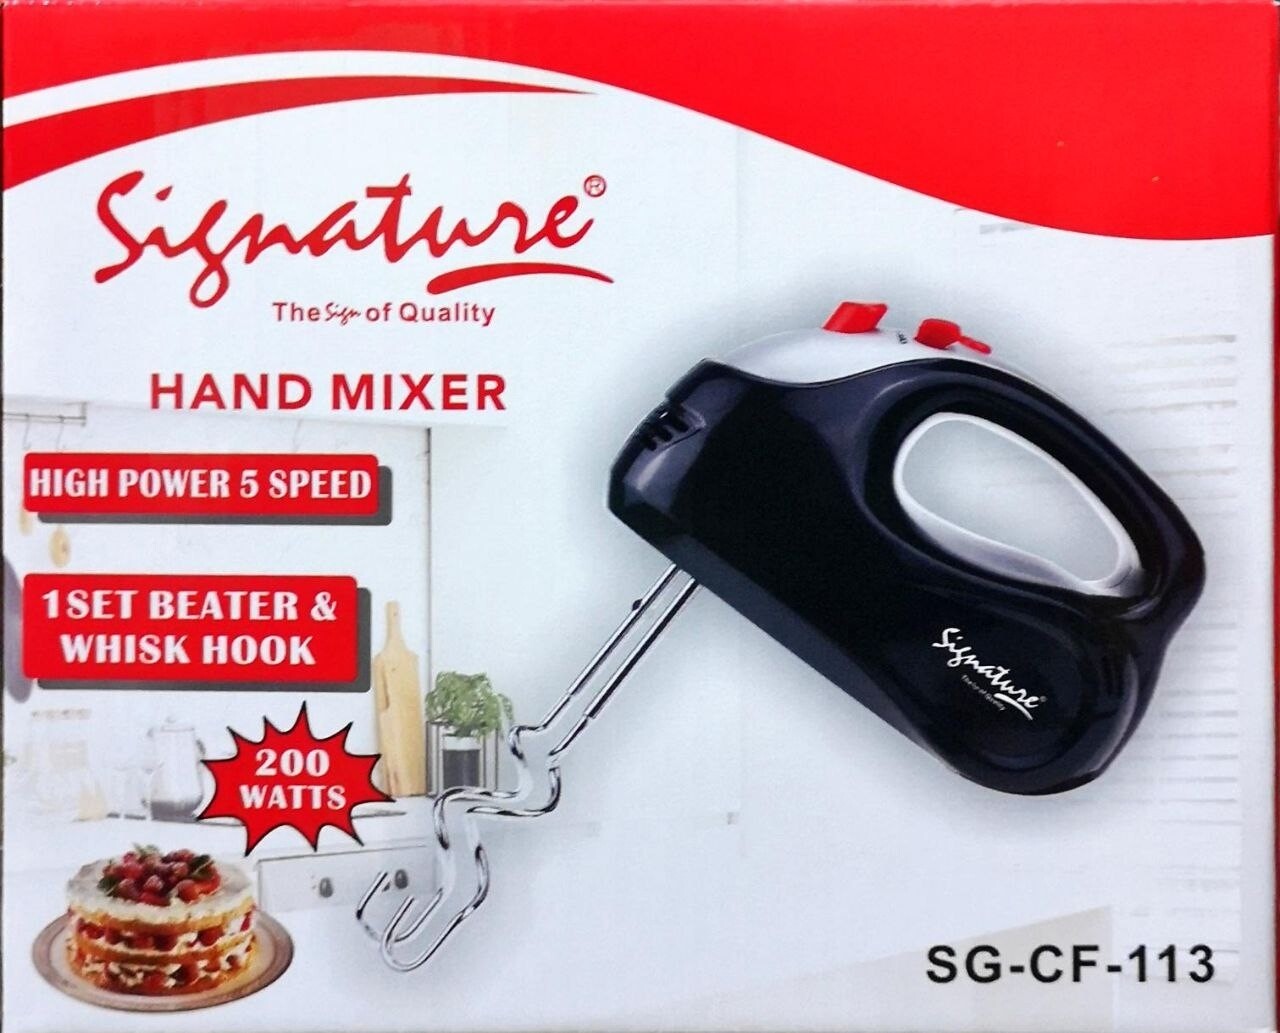 Signature hand mixer for all your cooking tasks: Beating, Mixing, Whisking ,Blending, Mashing with high quality stainless-steel attachments. 2 Detachable Beaters &amp; Whisker / DoughSG-CF-113